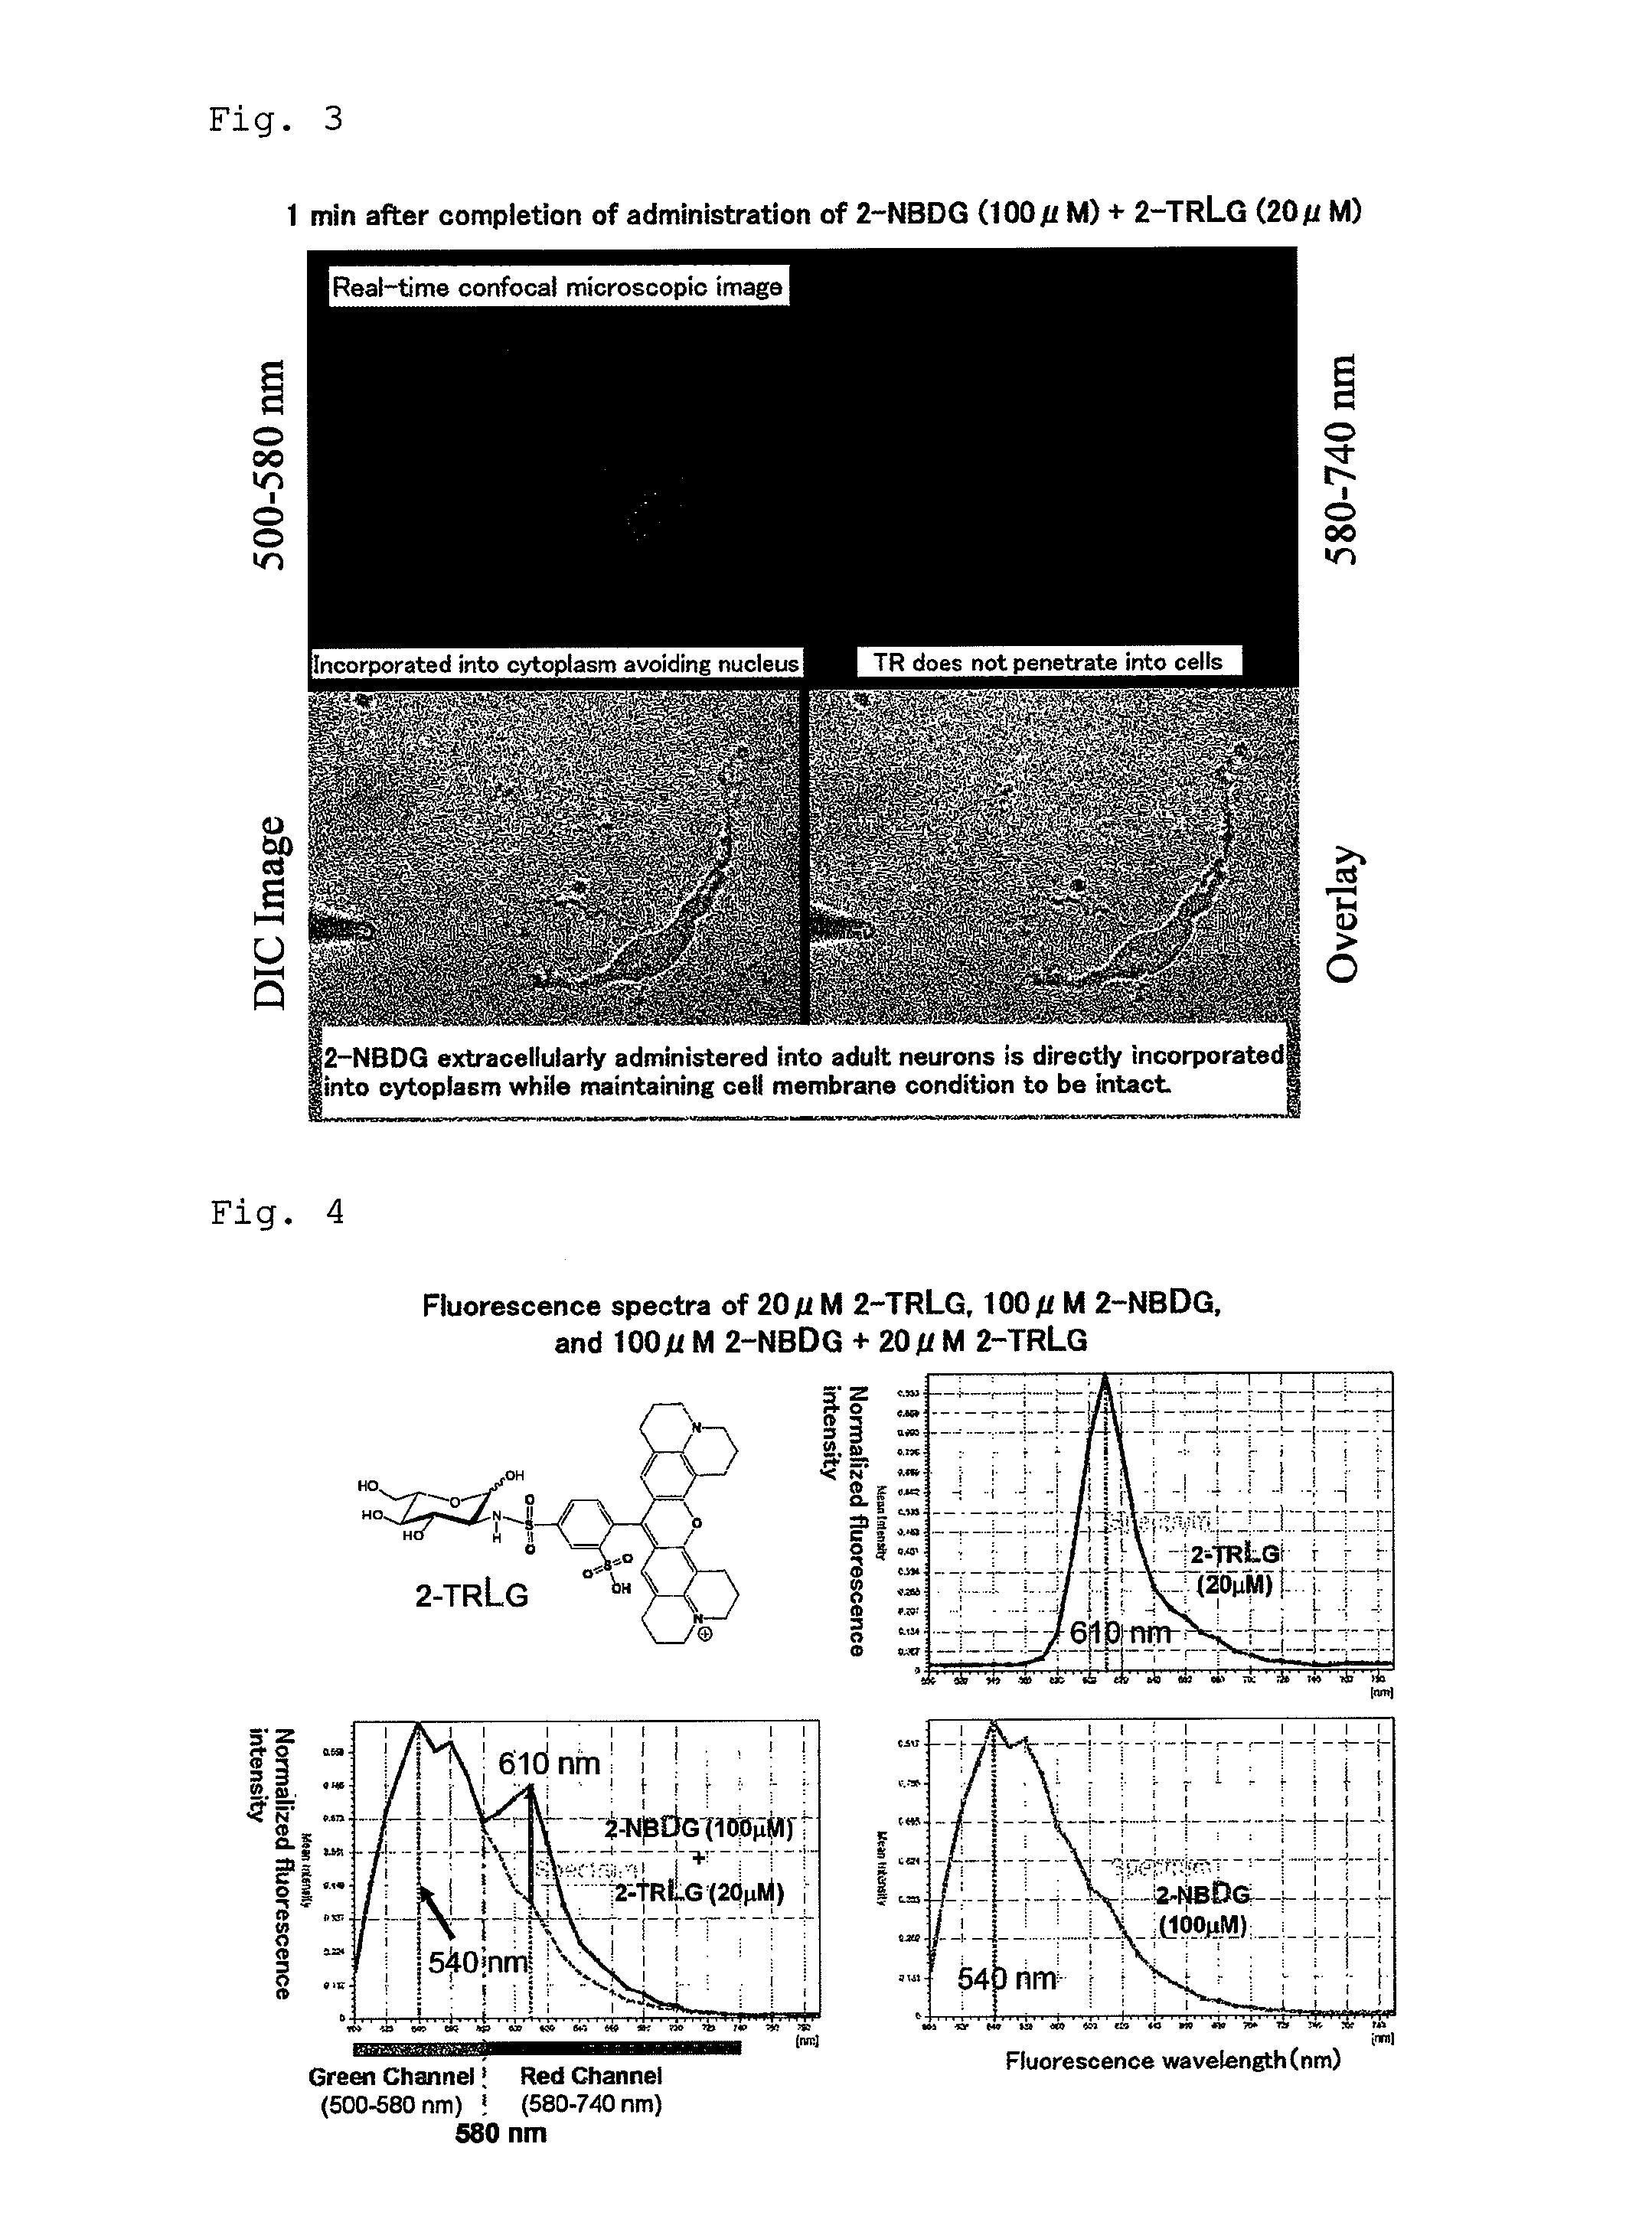 Method for evaluating specific incorporation of D-glucose into cells